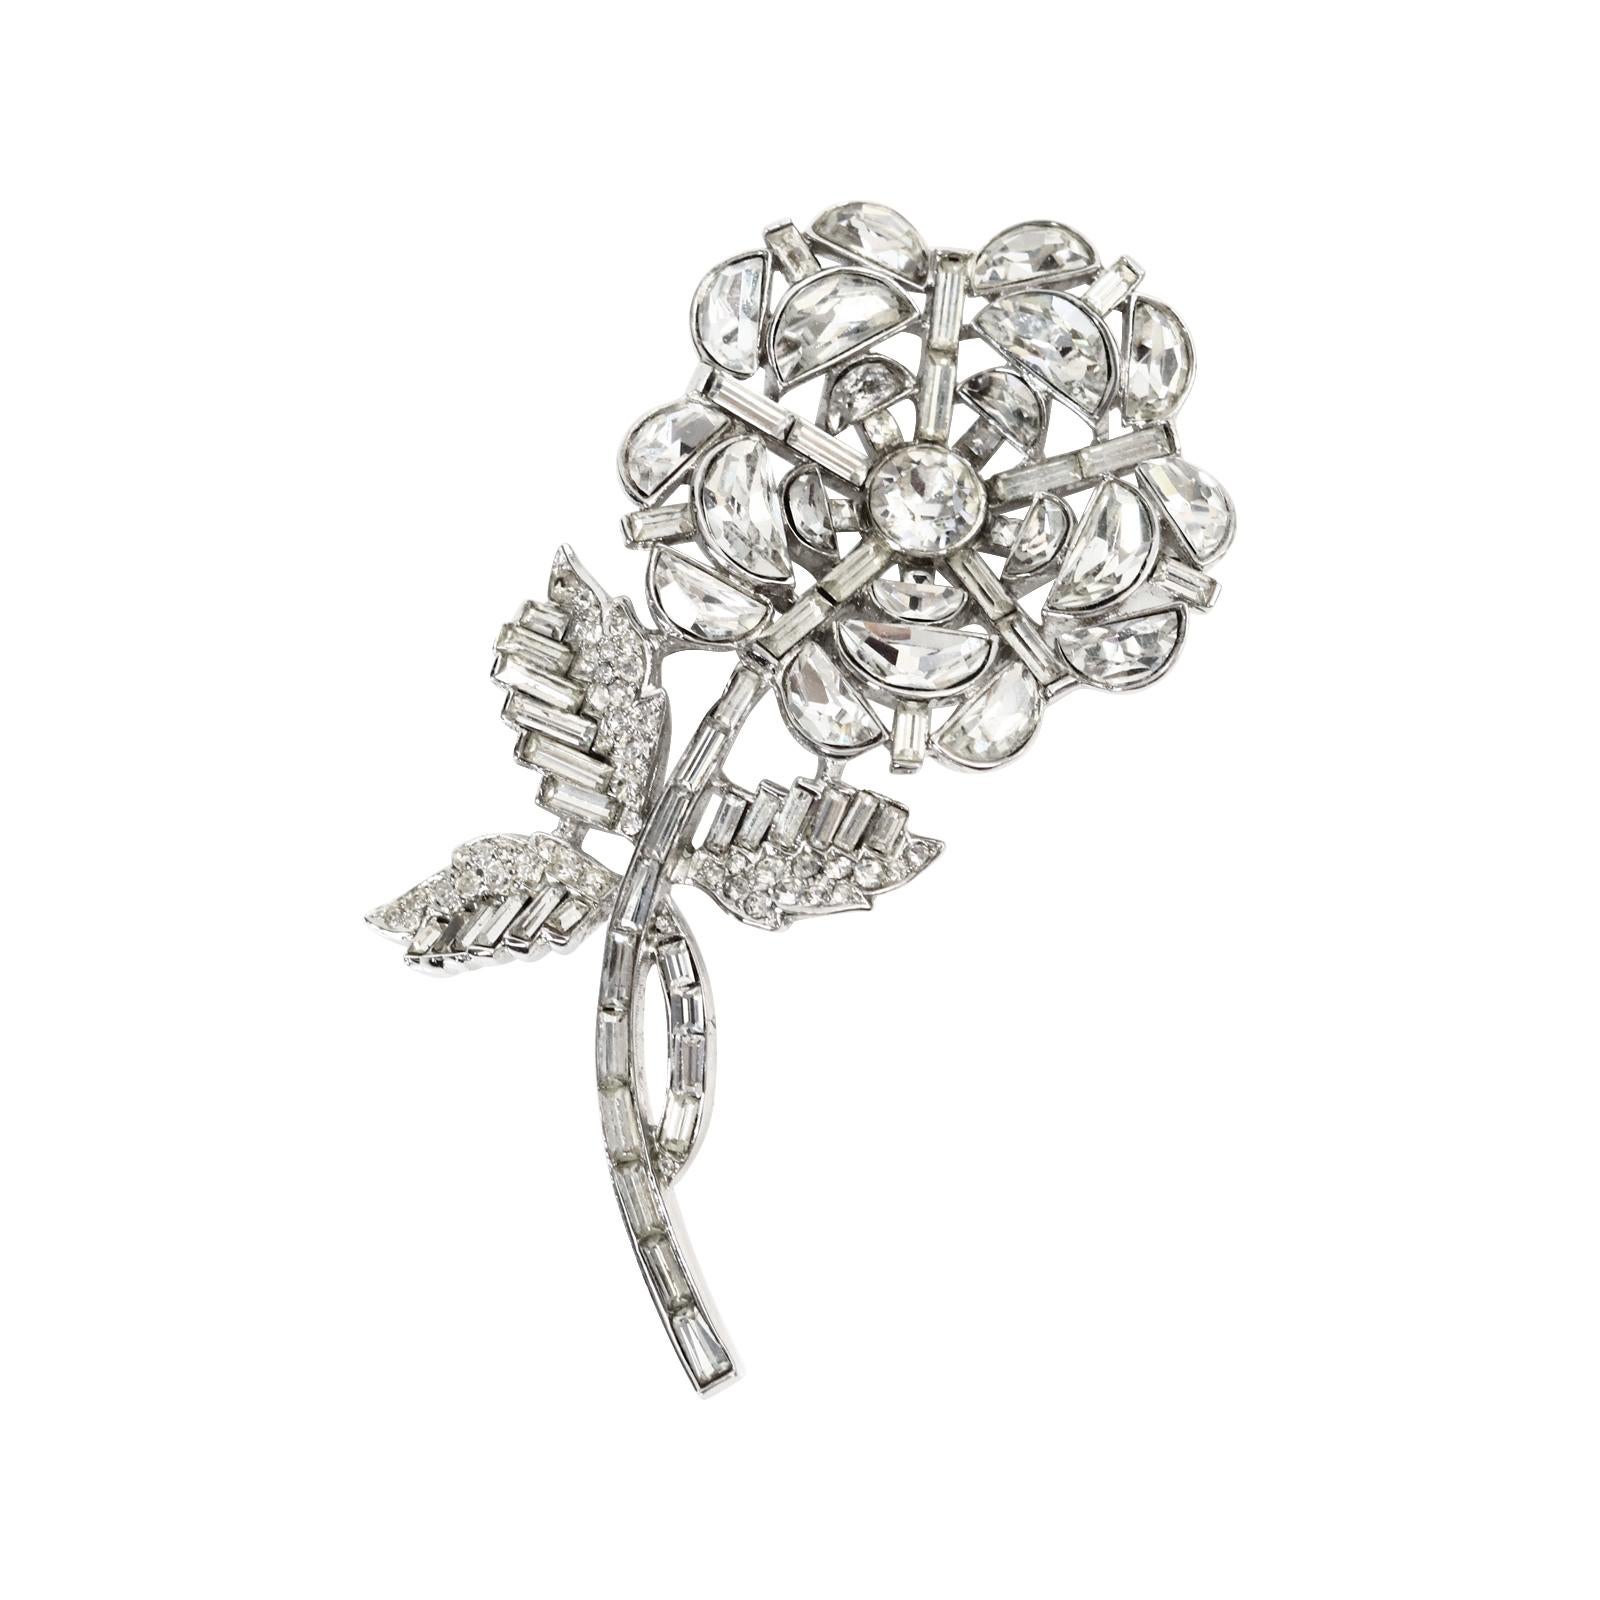 Vintage Alfred Phillipe Trifari Flower Brooch Pat Pend Circa 1951. This brooch is so magnificent.  It looks like fine jewelry and is preserved so well. There are so many different cuts used in this brooch from pave, baguette, round and half round. 